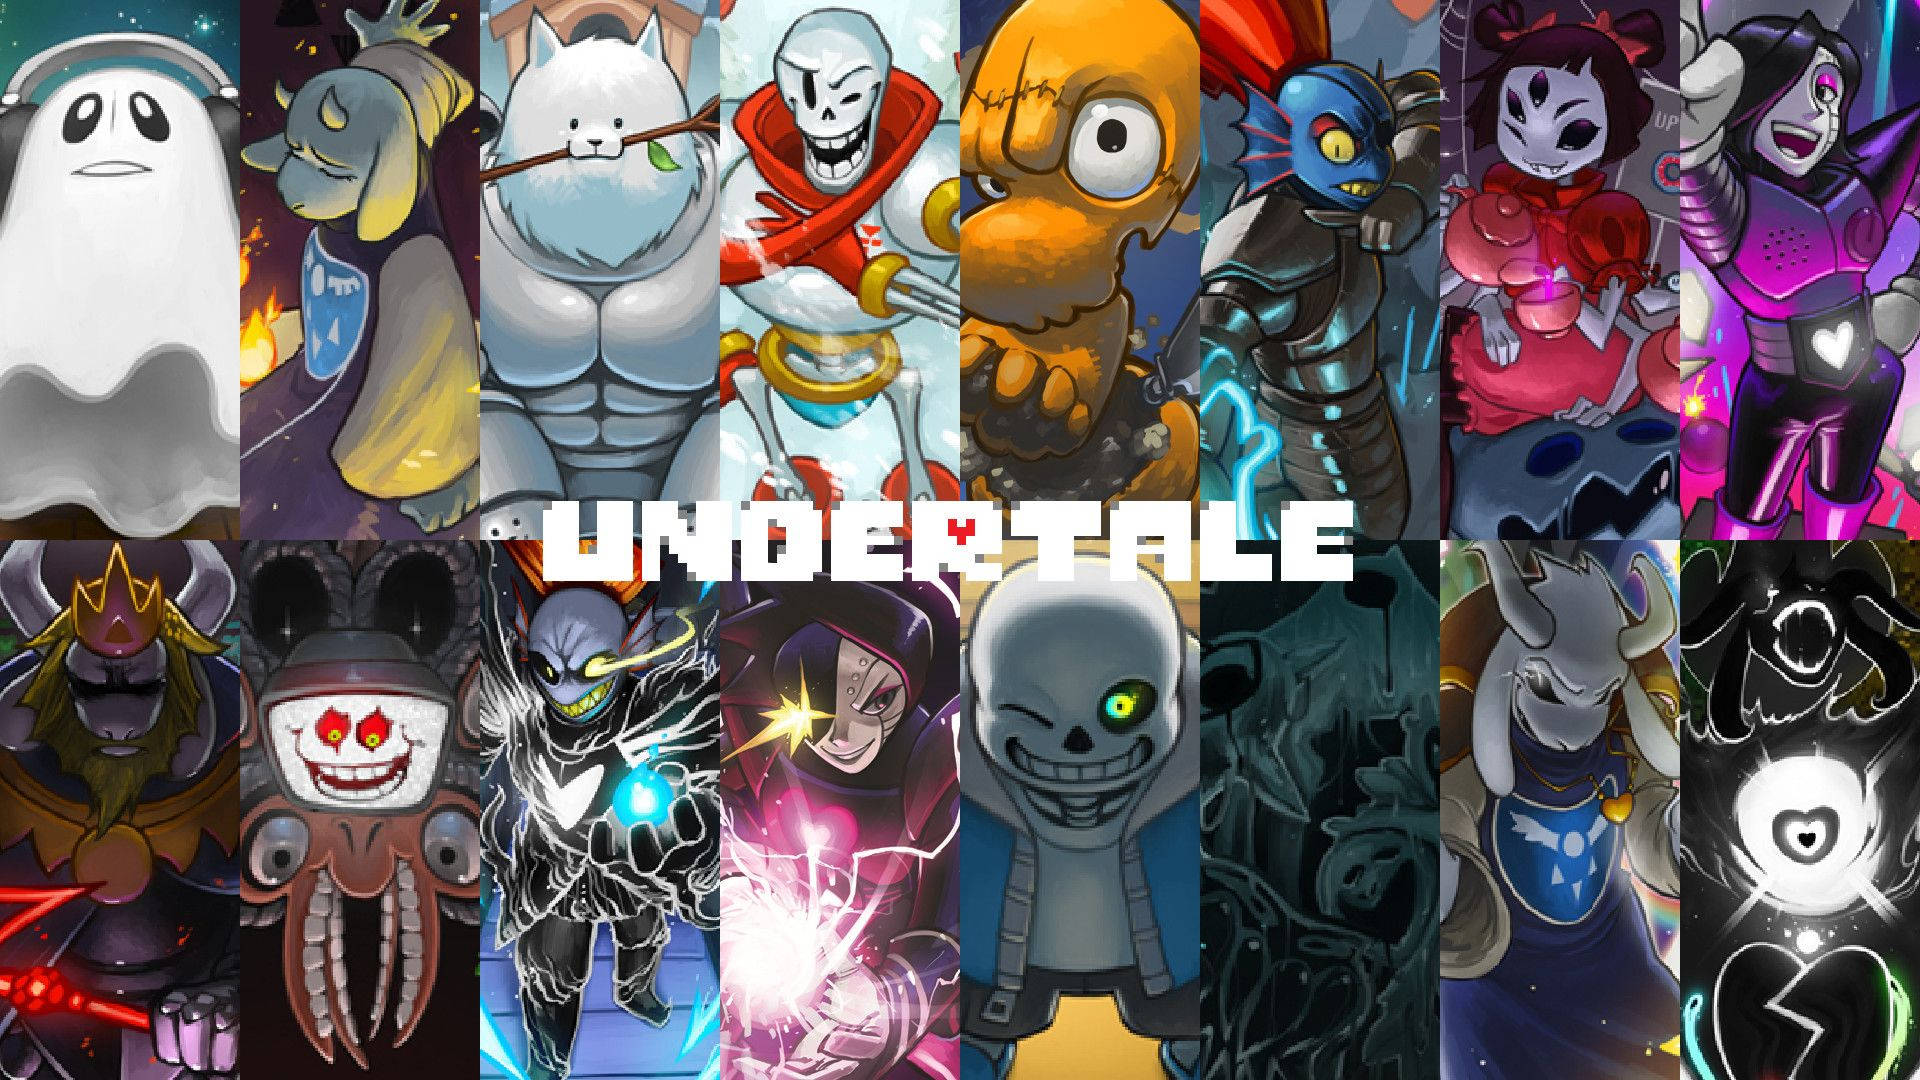 Meet the characters of the award-winning video game Undertale! Wallpaper